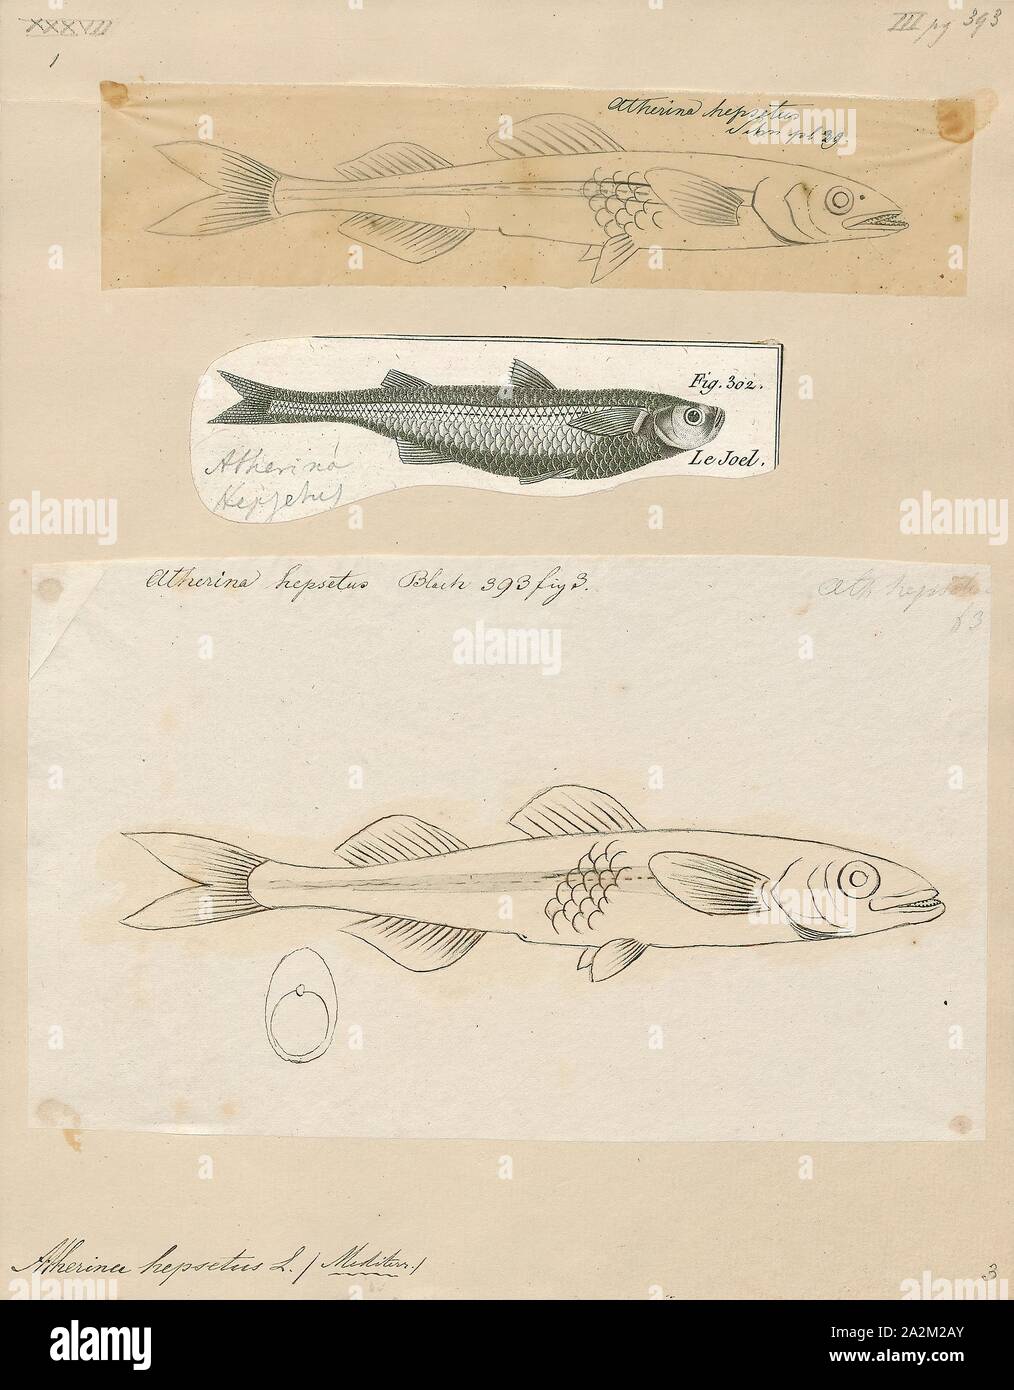 Atherina hepsetus, Print, The Mediterranean sand smelt, Atherina hepsetus, is a species of fish in the Atherinidae family., 1700-1880 Stock Photo